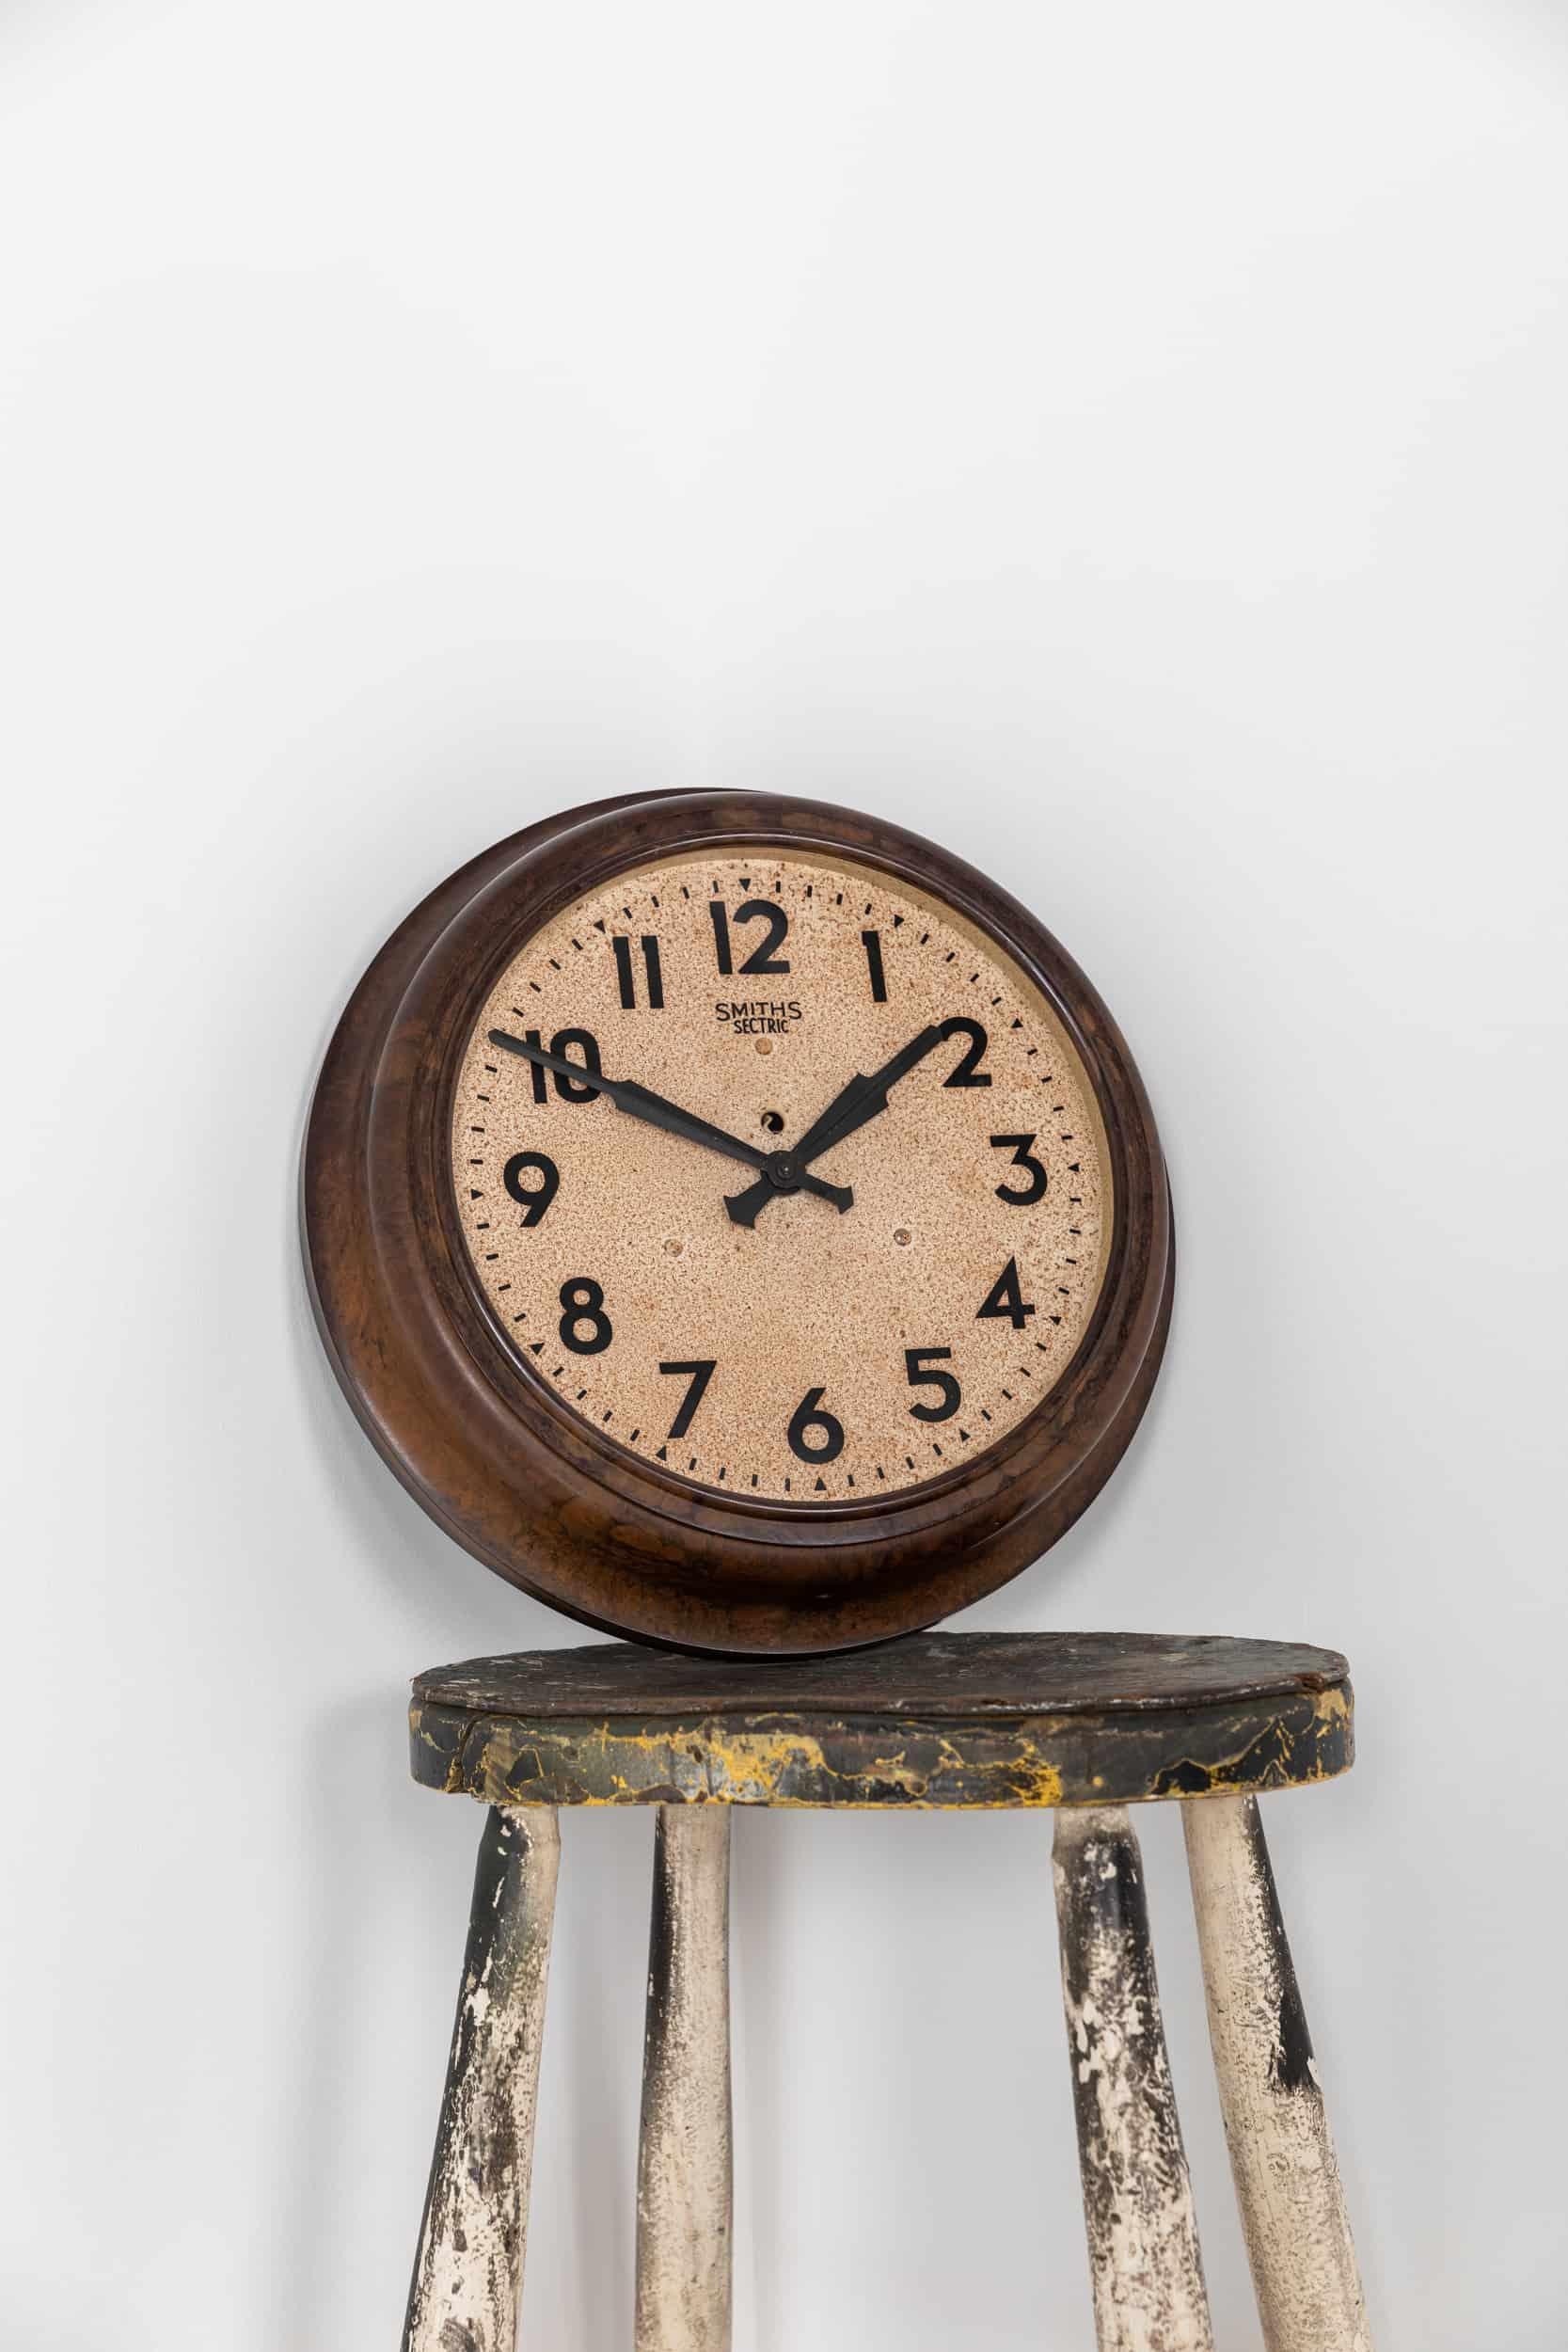 Stunning example of an industrial wall clock by Smiths English Clock Systems. c.1940

A fully original Smiths clock featuring a weathered dial set in a beautiful marbled Bakelite surround. Smith Sectric branding to face. Rewired and running on the